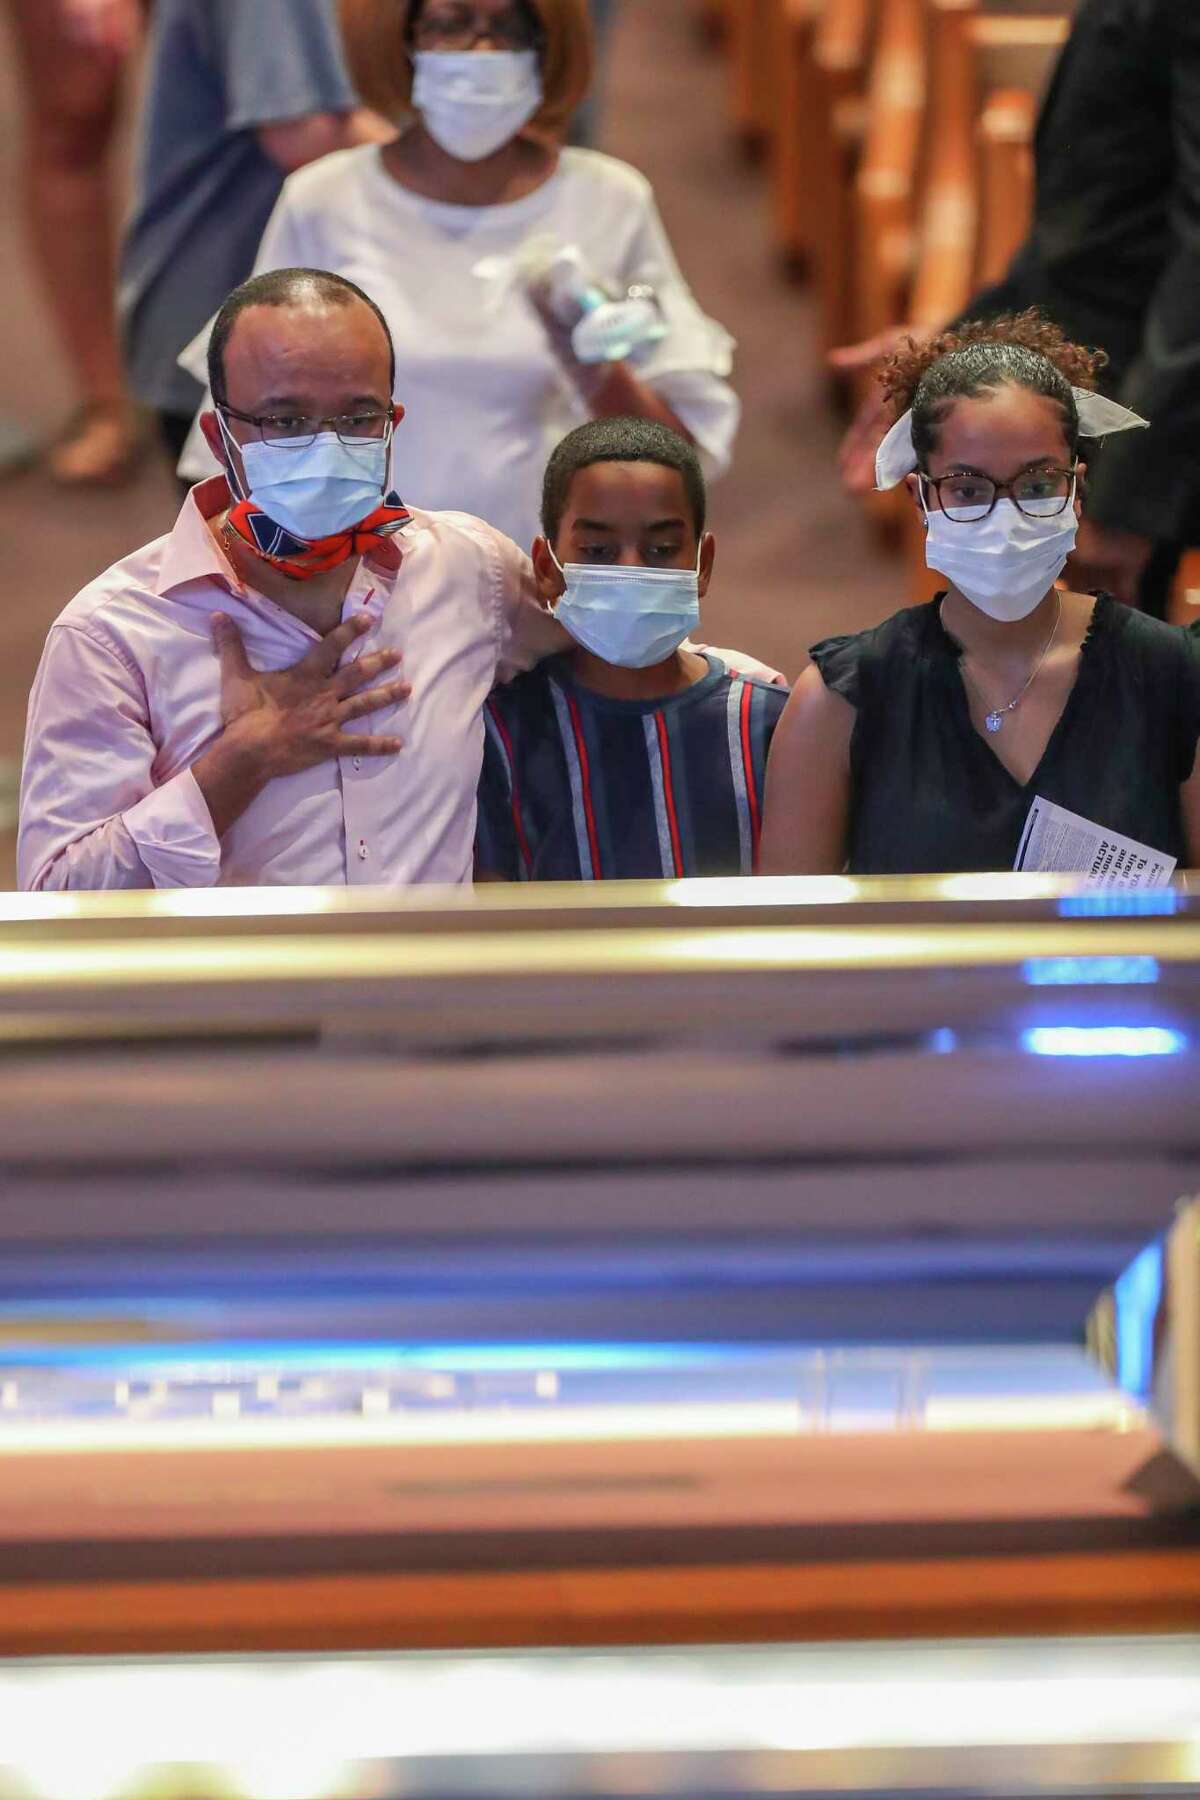 Mourners view the casket of George Floyd during a public visitation Monday, June 8, 2020, at The Fountain of Praise church in Houston. Floyd died after being restrained by Minneapolis Police officers on May 25.